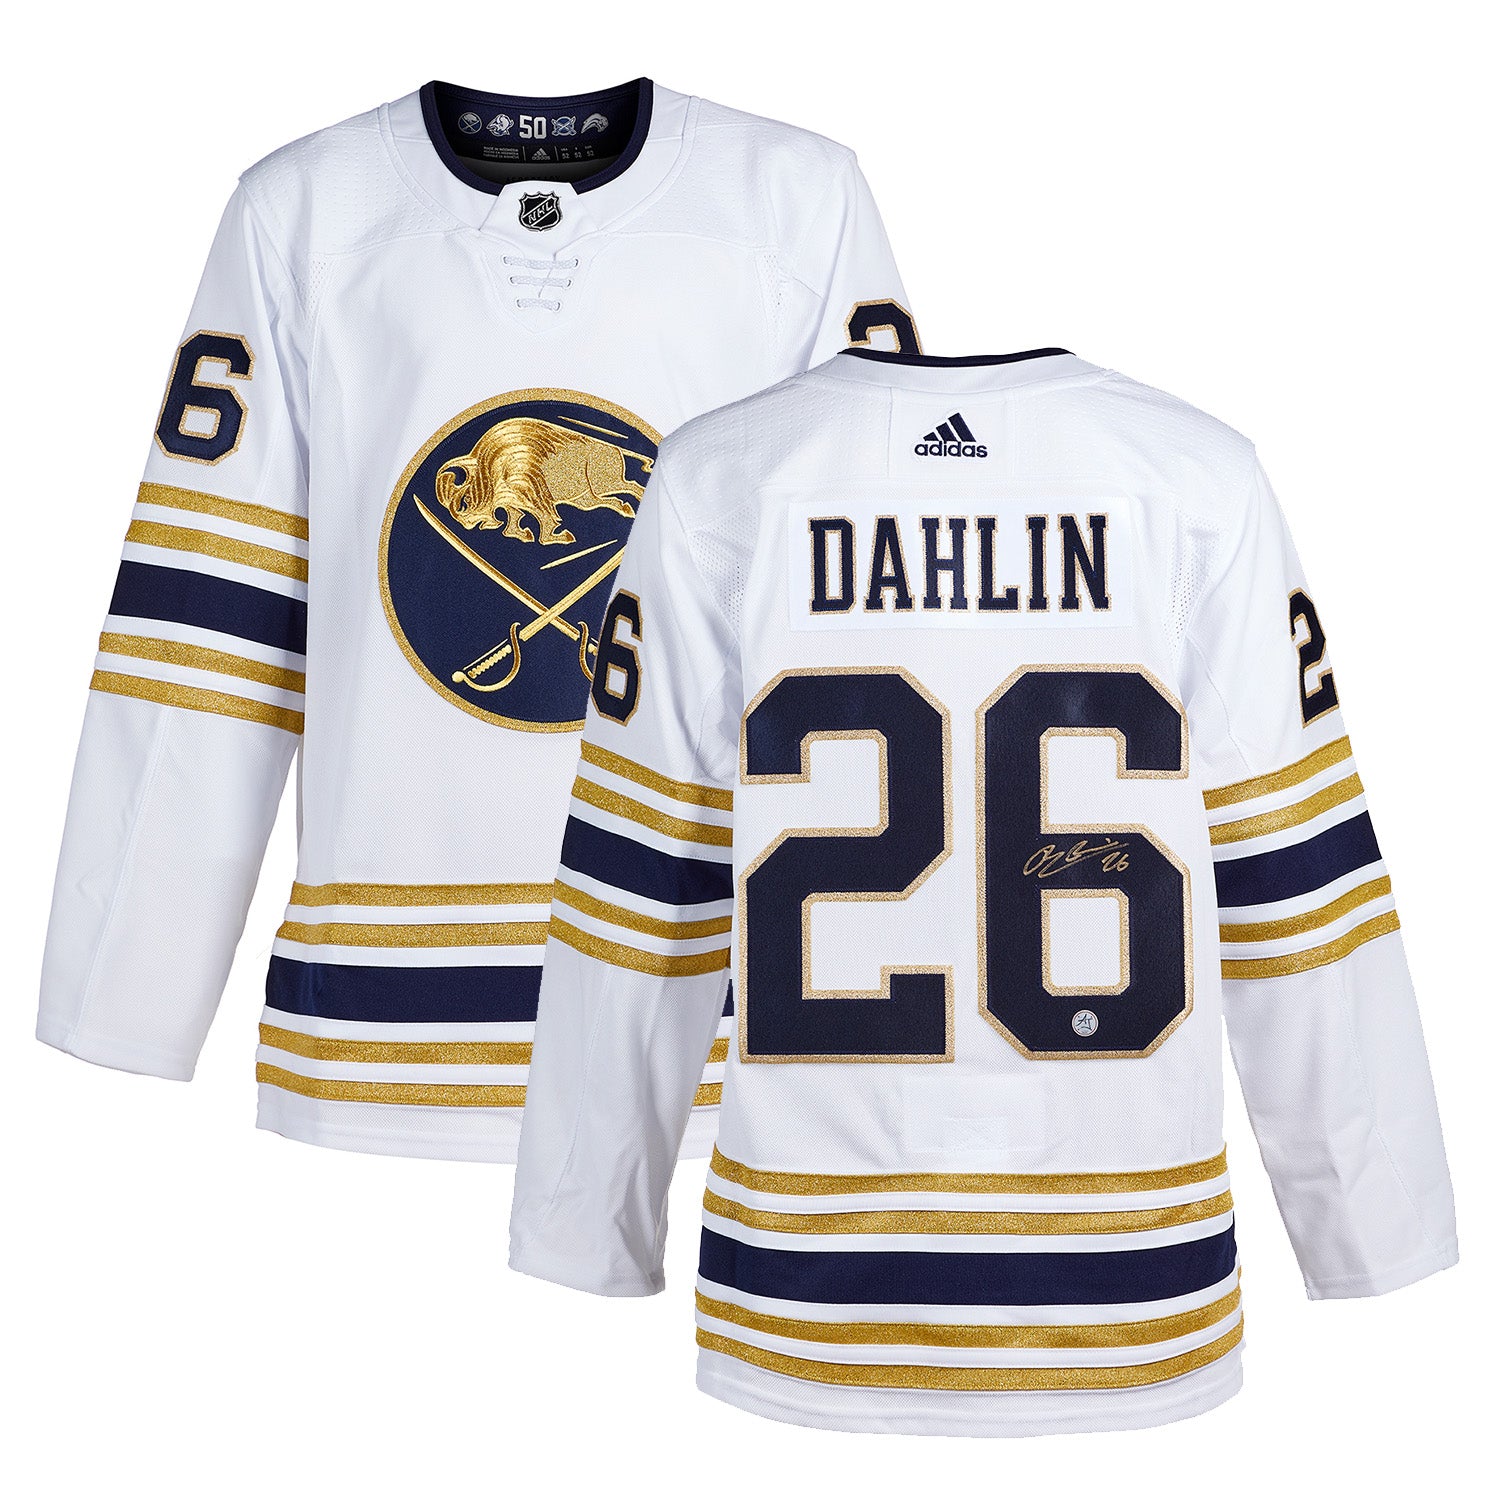 Jack Eichel's first Buffalo Sabres jersey sold at auction